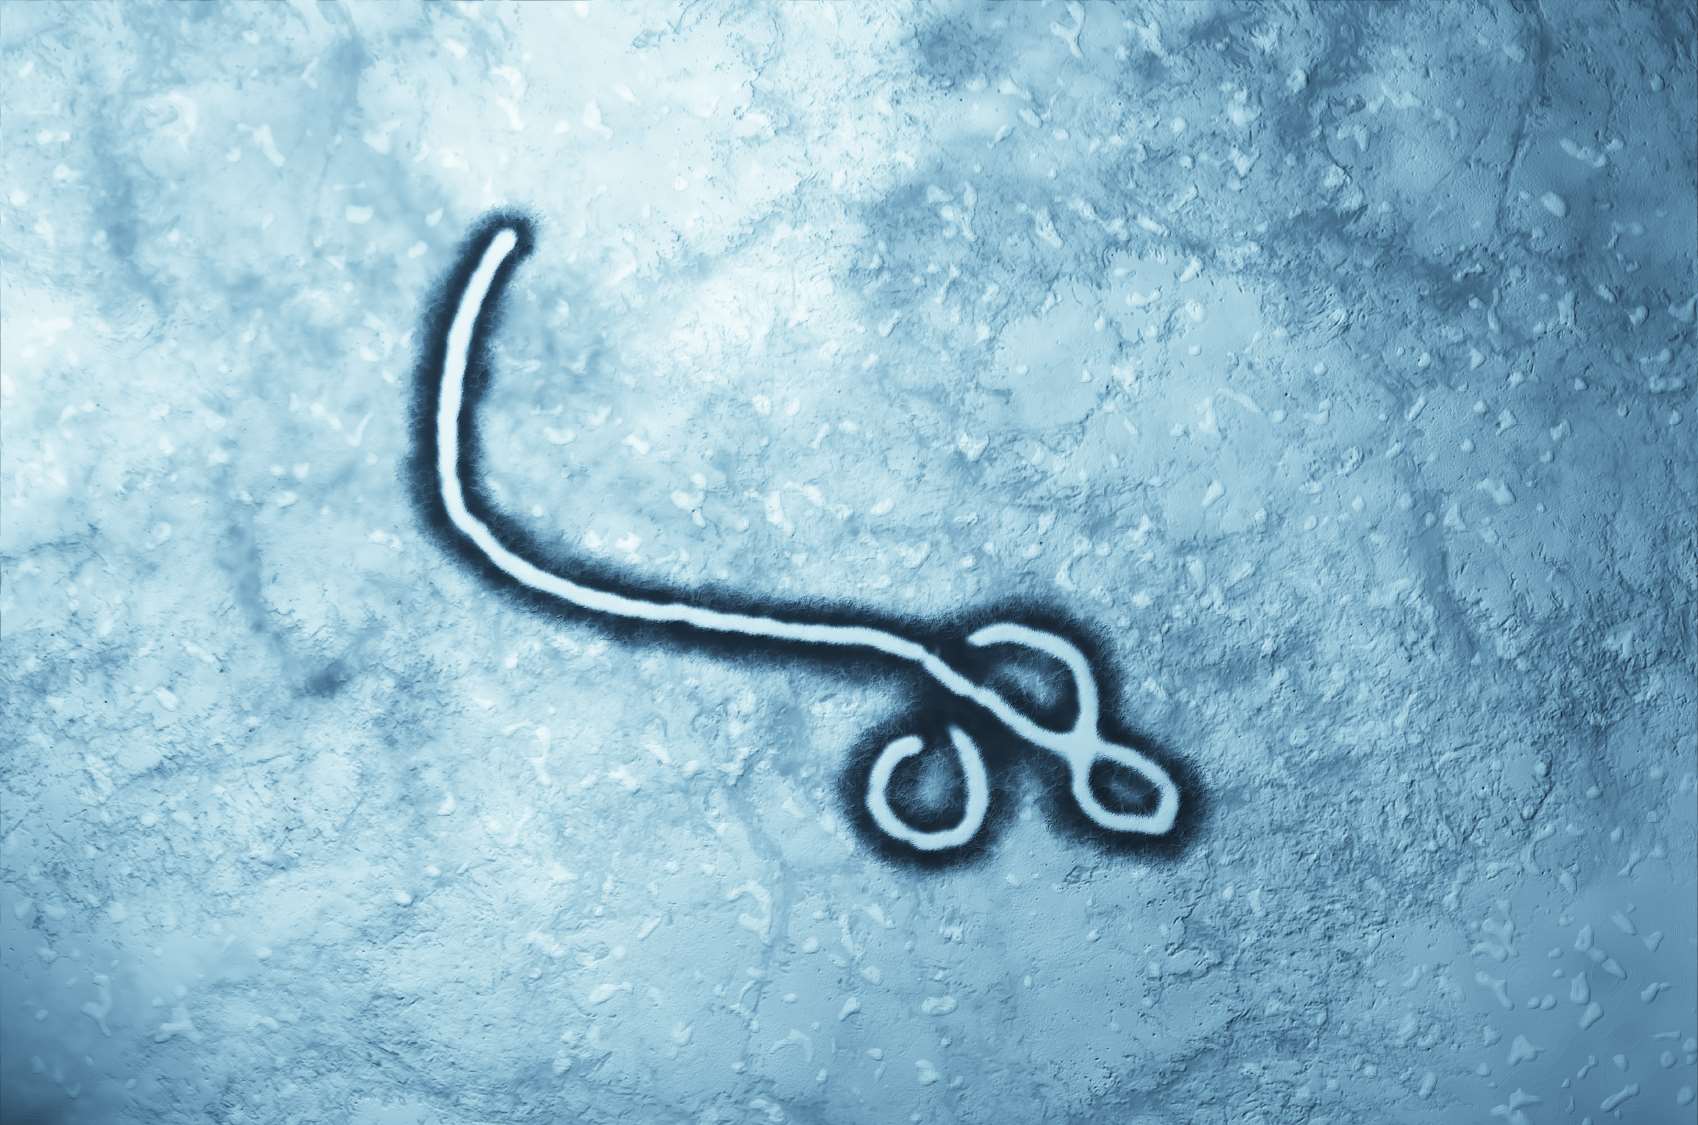 The Ebola virus has a long incubation period, which means screening may not be wholly effective. Library picture